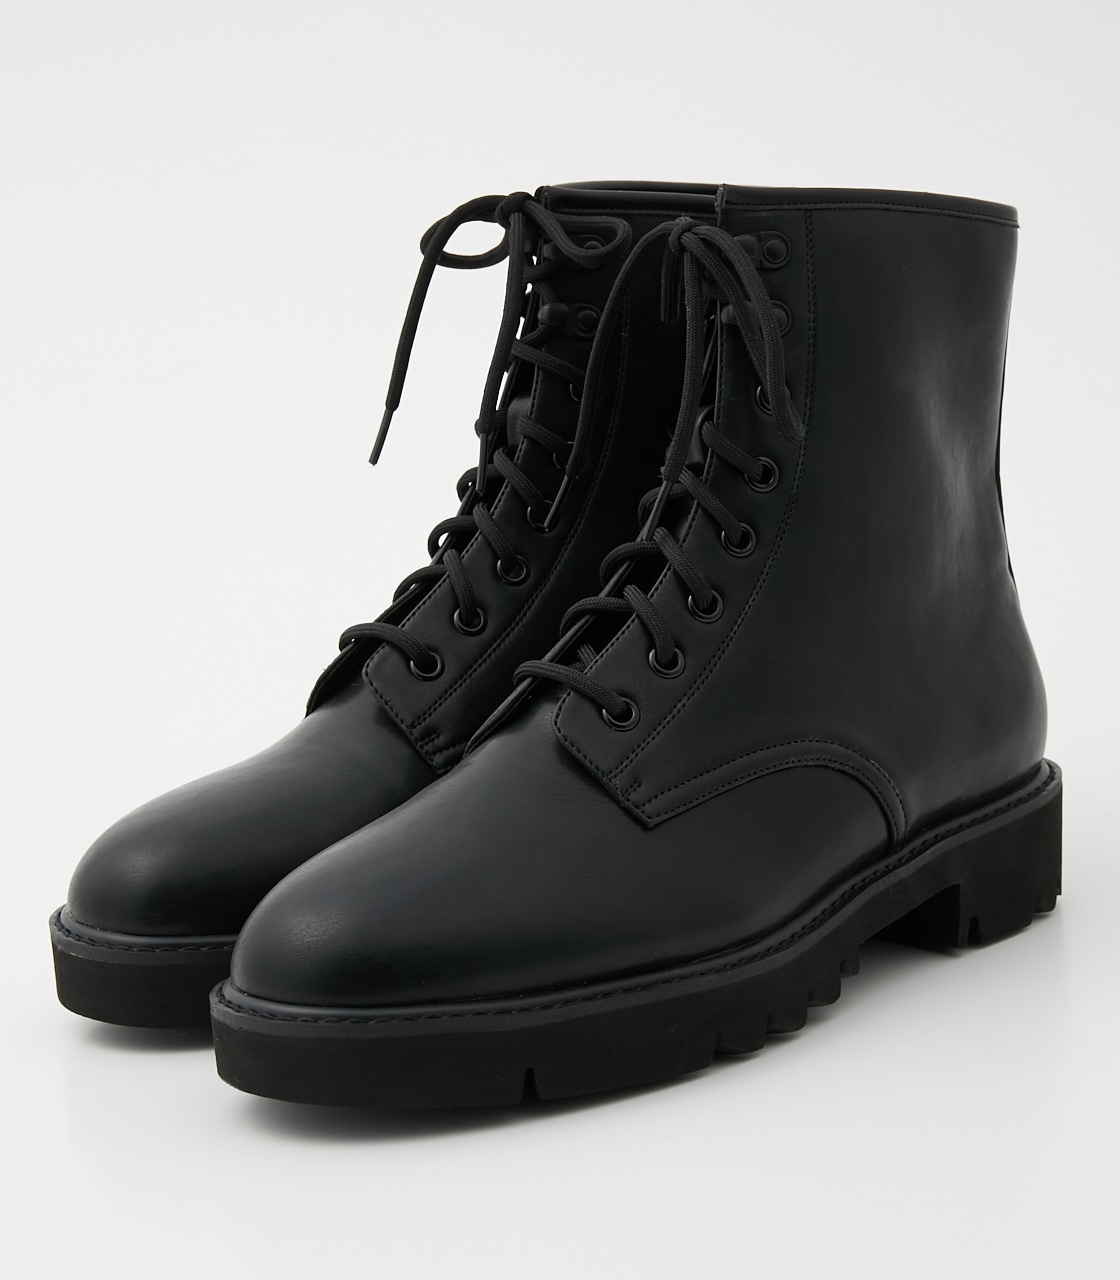 LACE UP BOOTS/レースアップブーツ 詳細画像 BLK 1